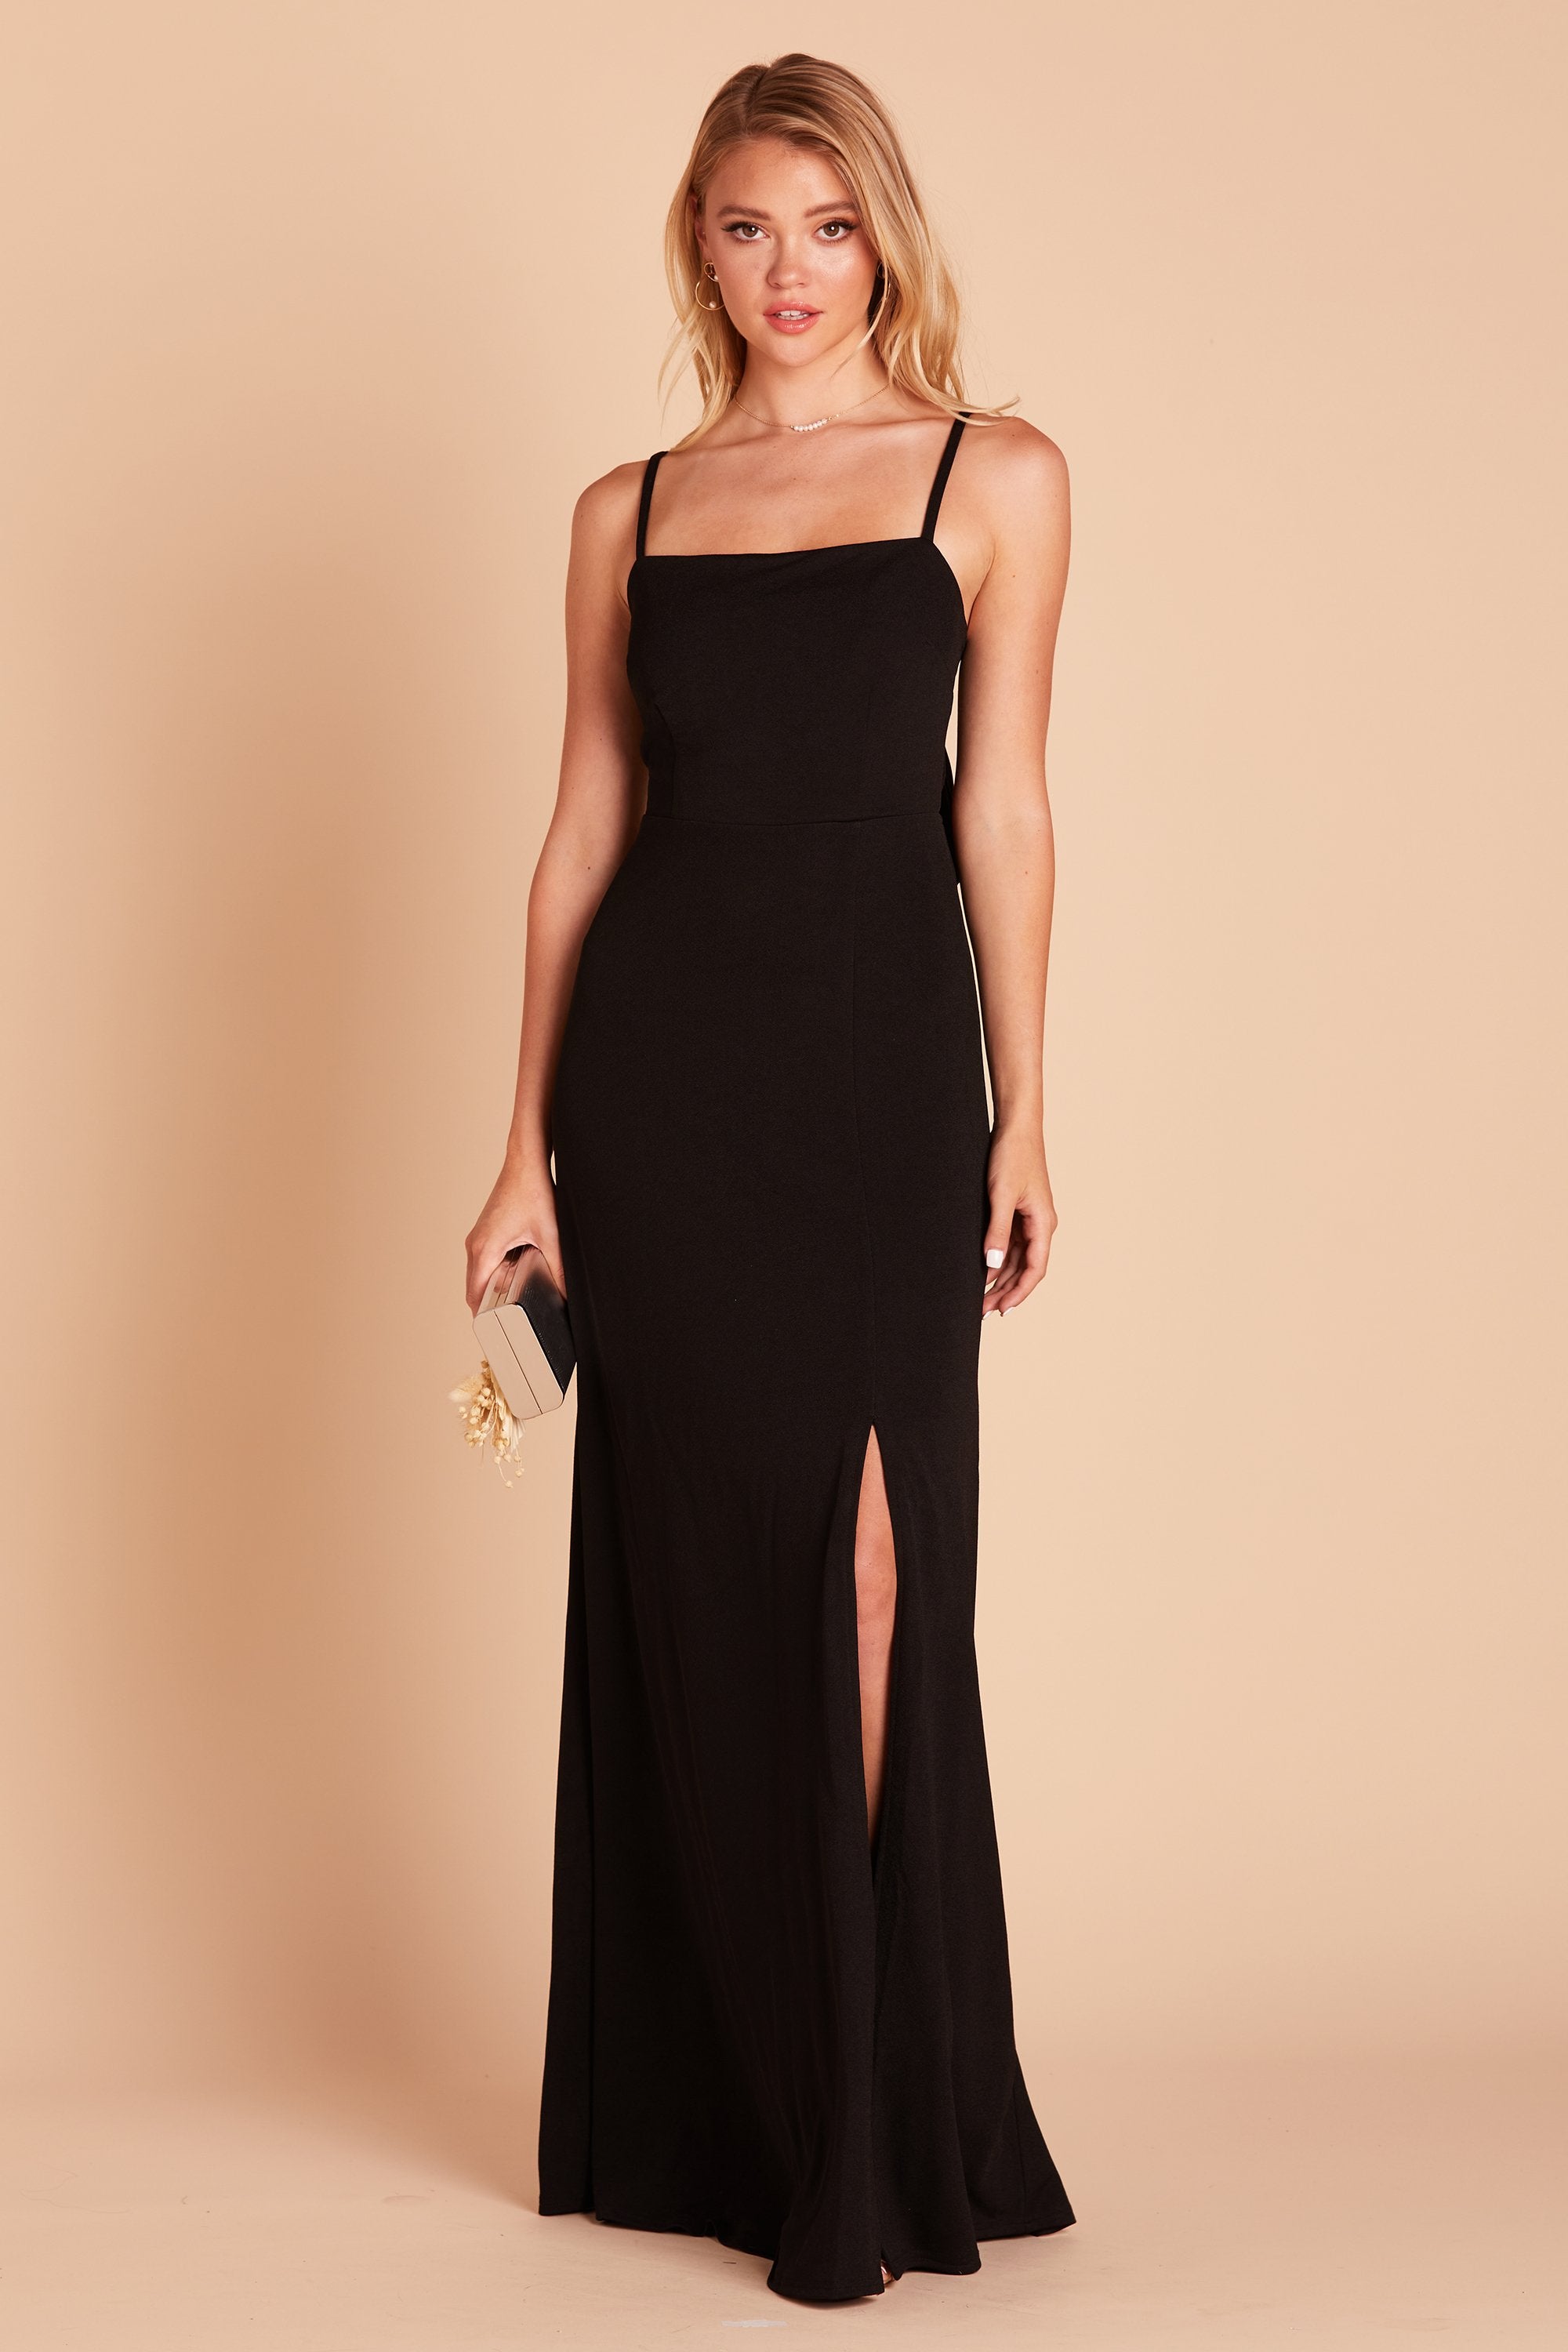 Benny bridesmaid dress in black crepe by Birdy Grey, front view